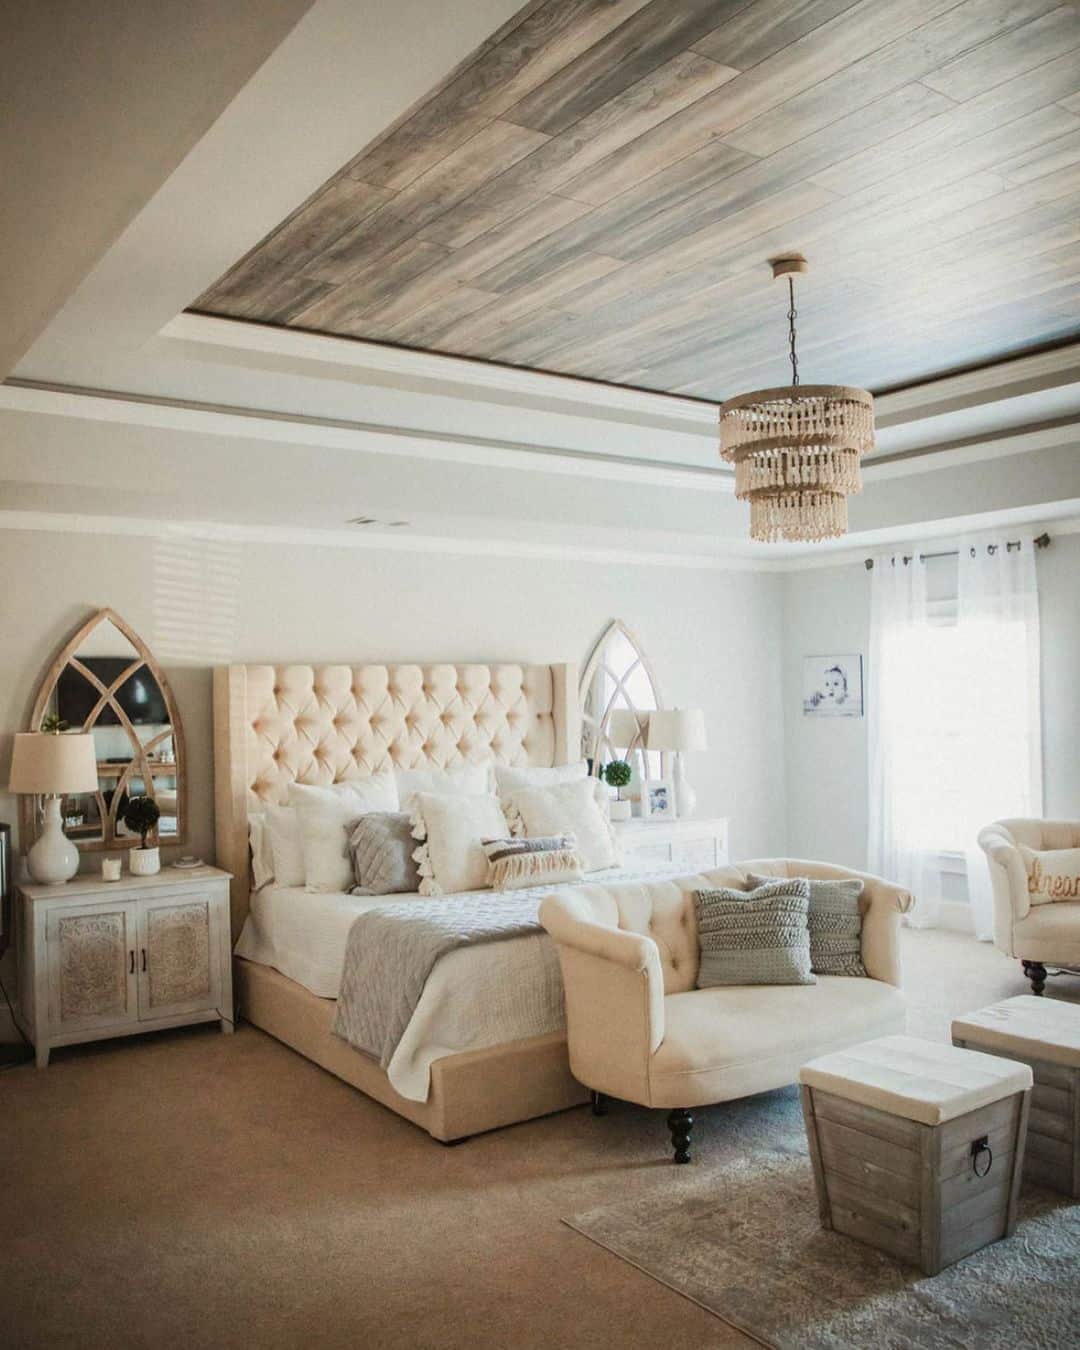 Rustic Bedroom Oasis with Wooden Tray Ceiling